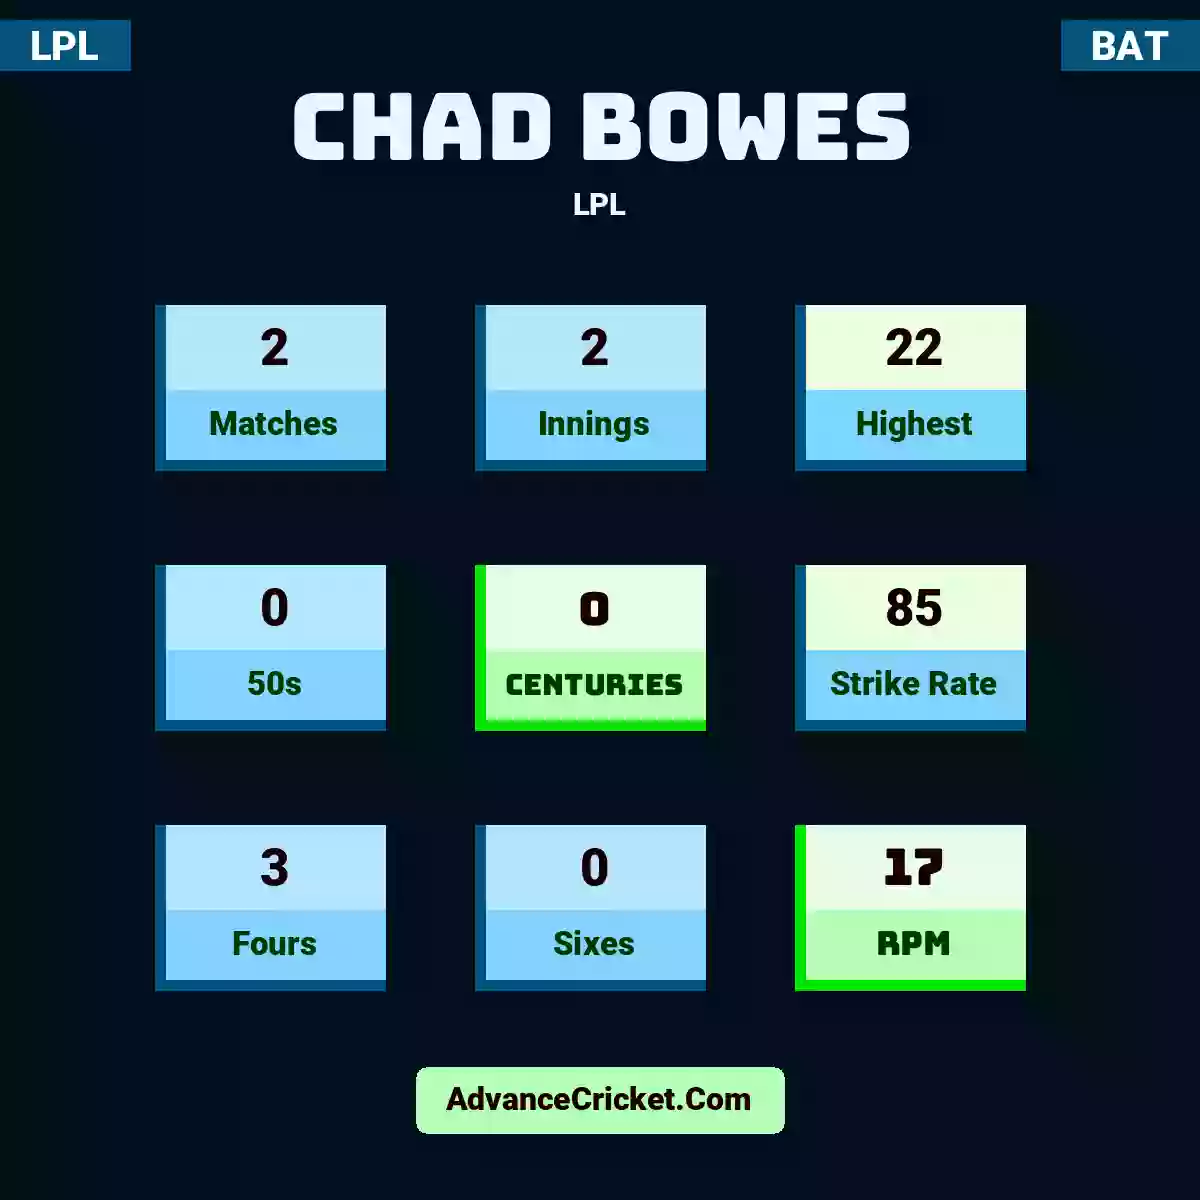 Chad Bowes LPL , Chad Bowes played 2 matches, scored 22 runs as highest, 0 half-centuries, and 0 centuries, with a strike rate of 85. C.Bowes hit 3 fours and 0 sixes, with an RPM of 17.